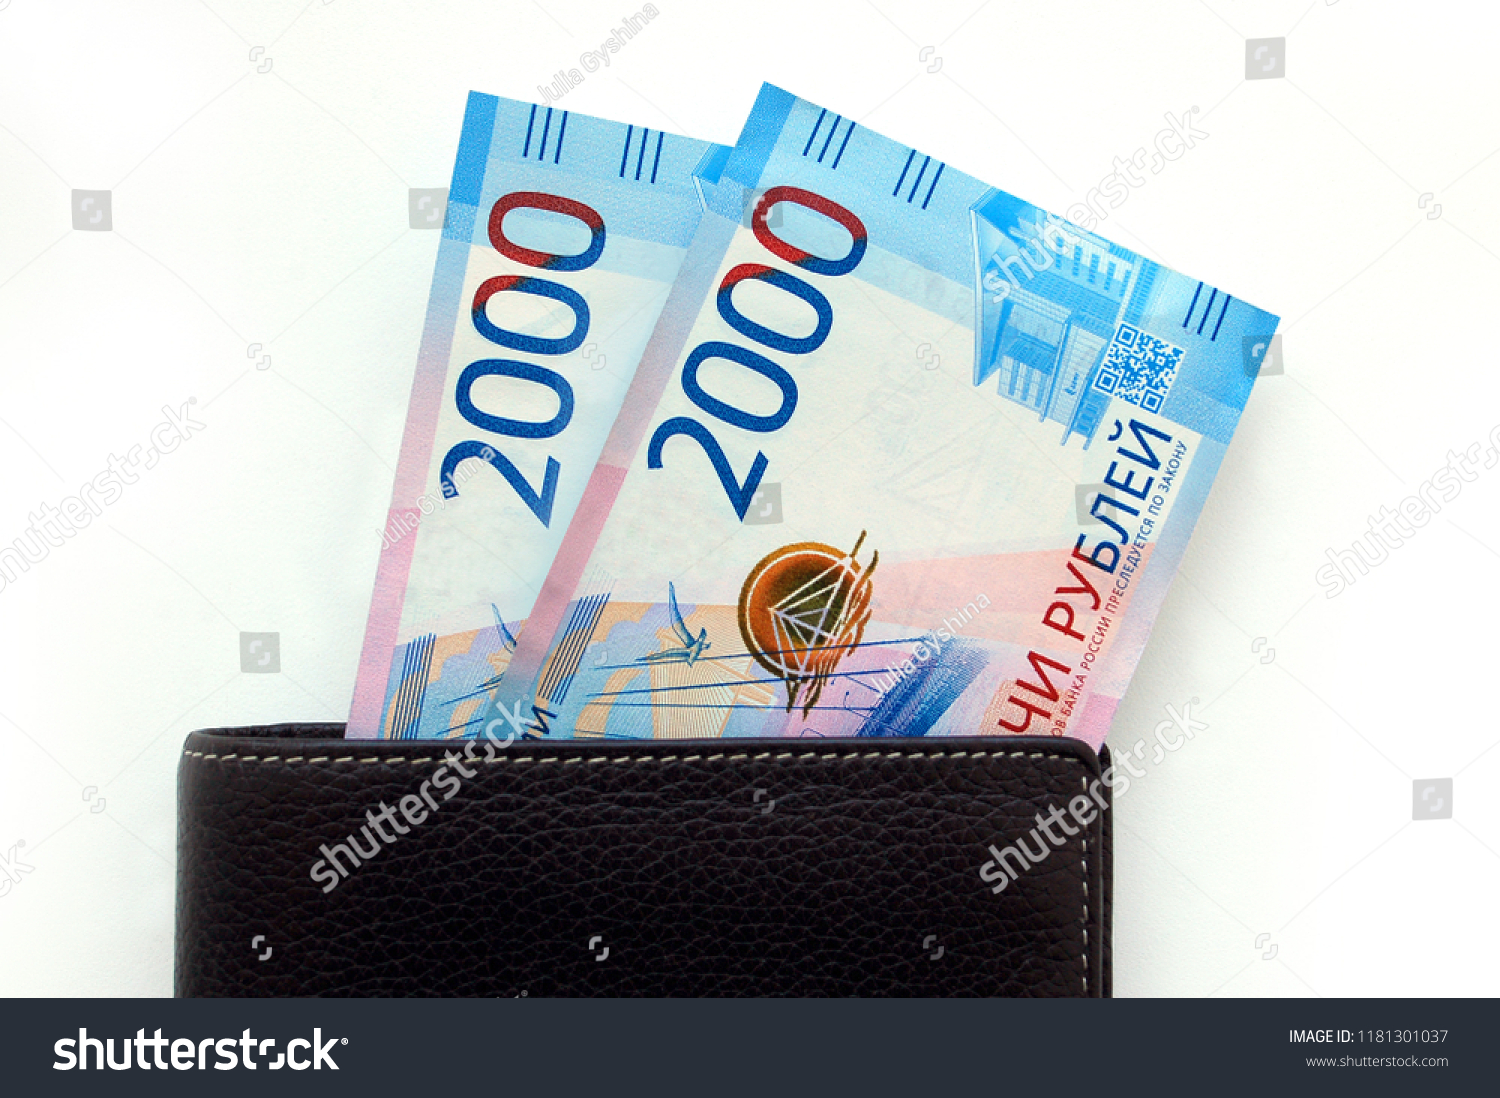 Russian cash. Bill in 2000 rubles. Black man's purse. Isolated on white #1181301037